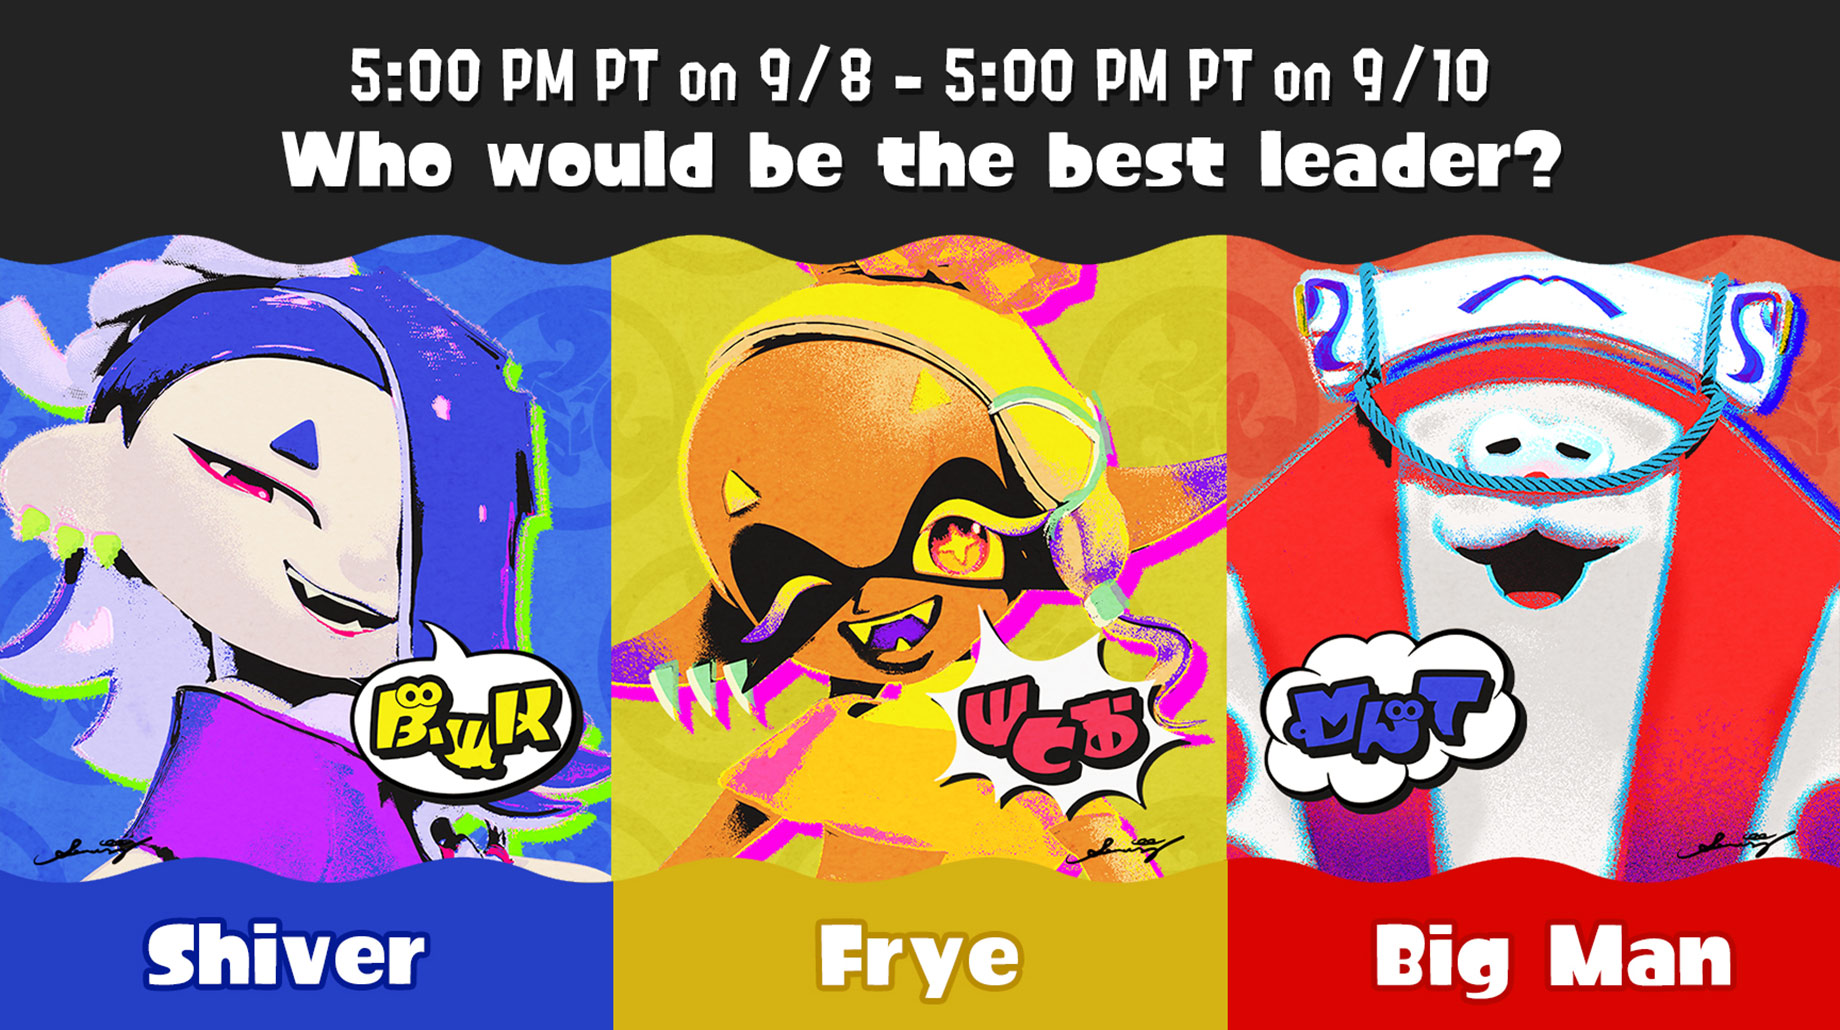 Splatfest signboard that reads "Who would be the best leader? Shiver, Frye, or Big Man?"